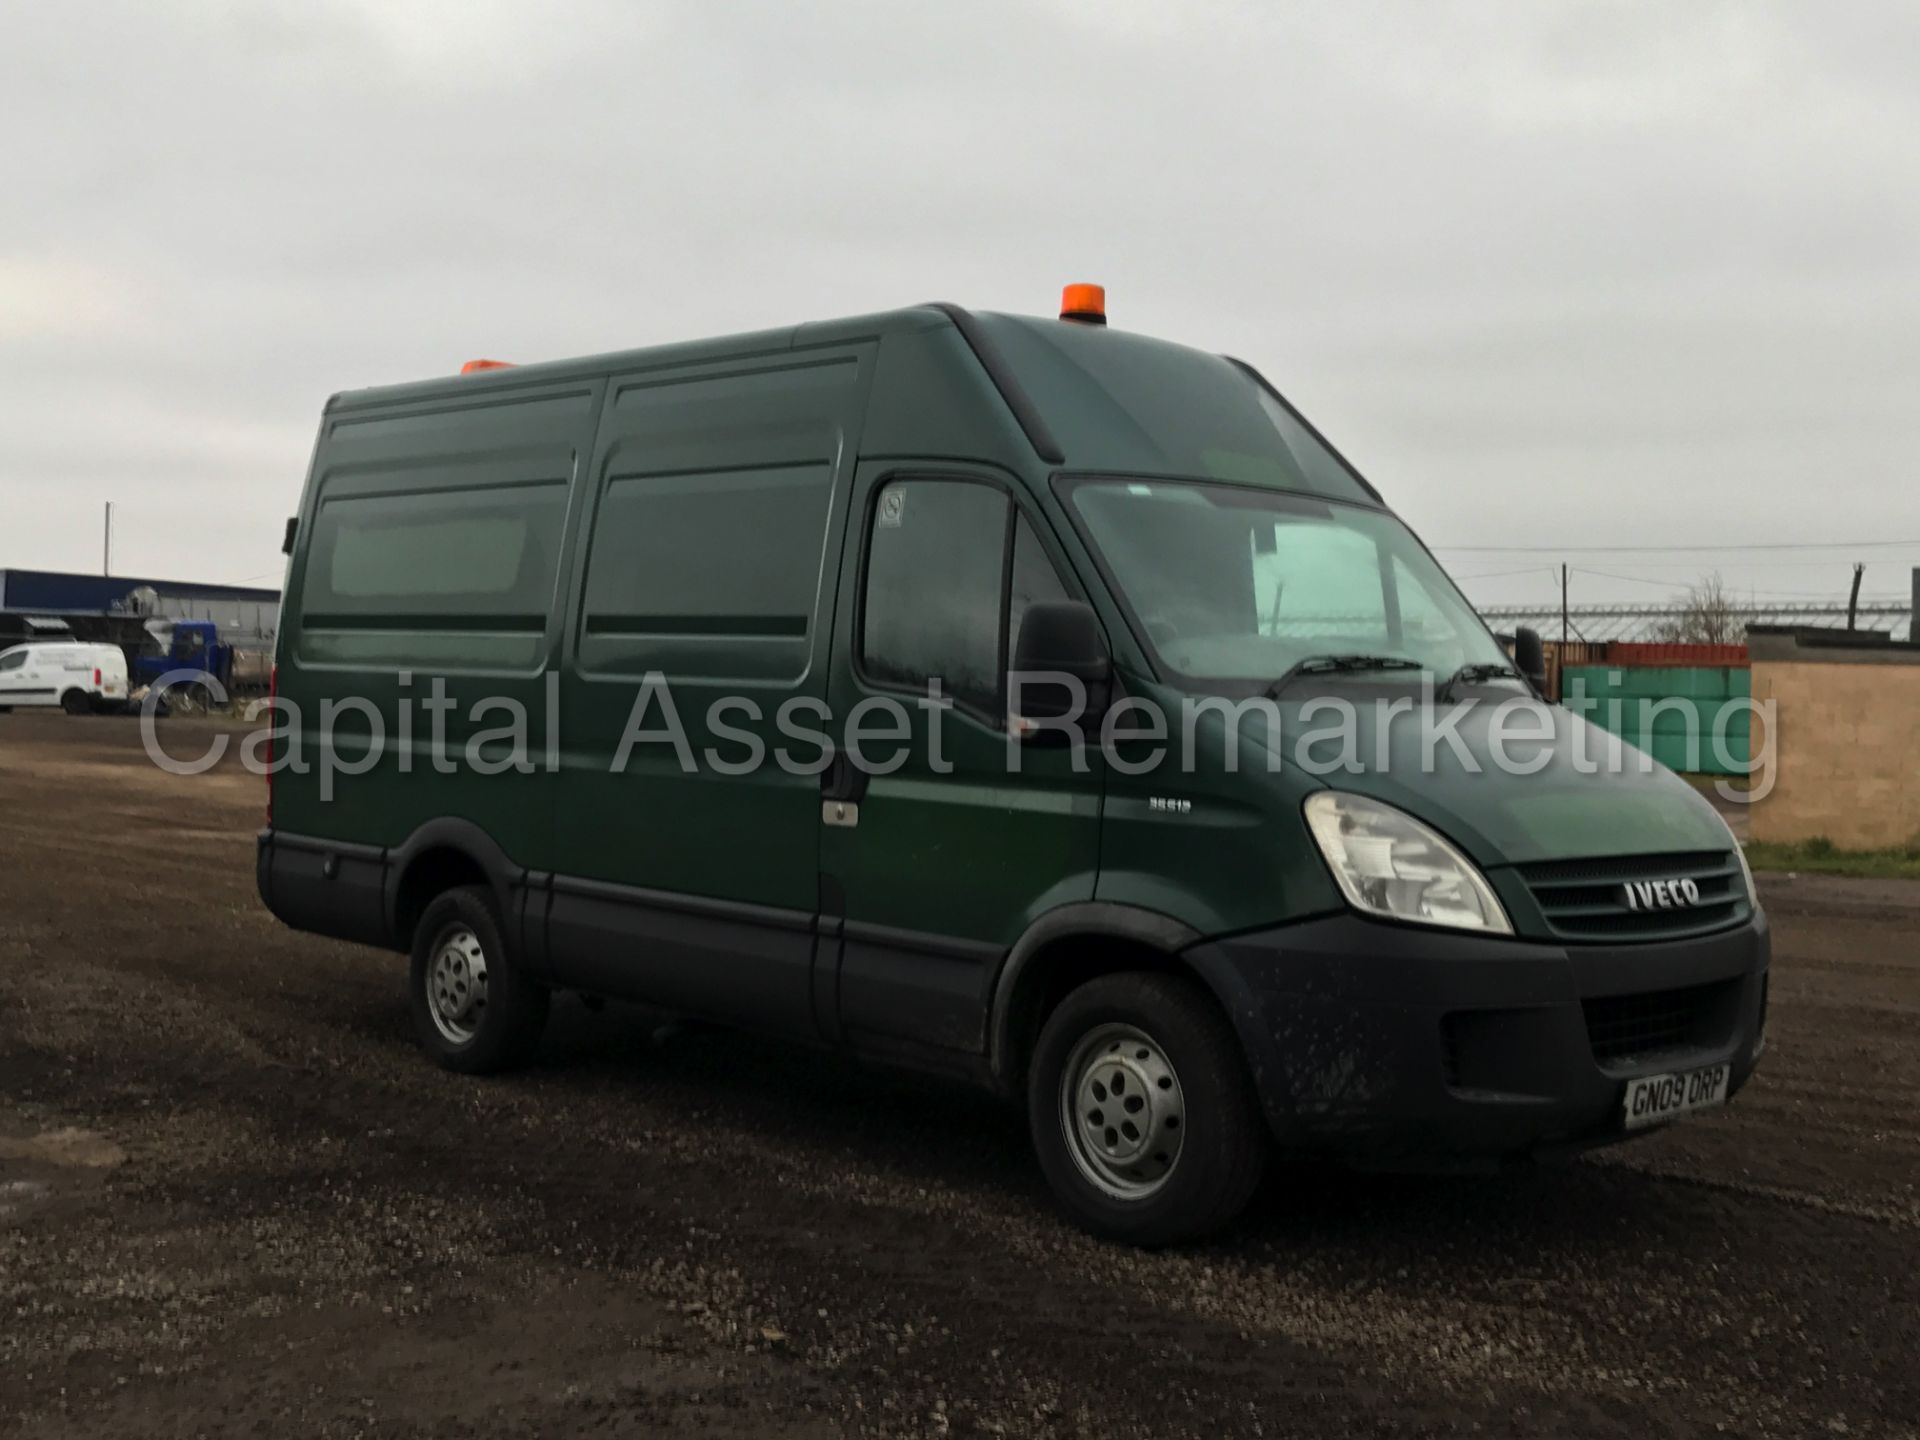 (On Sale) IVECO DAILY 35S12 'MWB HI-ROOF' (2009) '2.3 DIESEL - 120 BHP - 5 SPEED' (1 COMPANY OWNER)